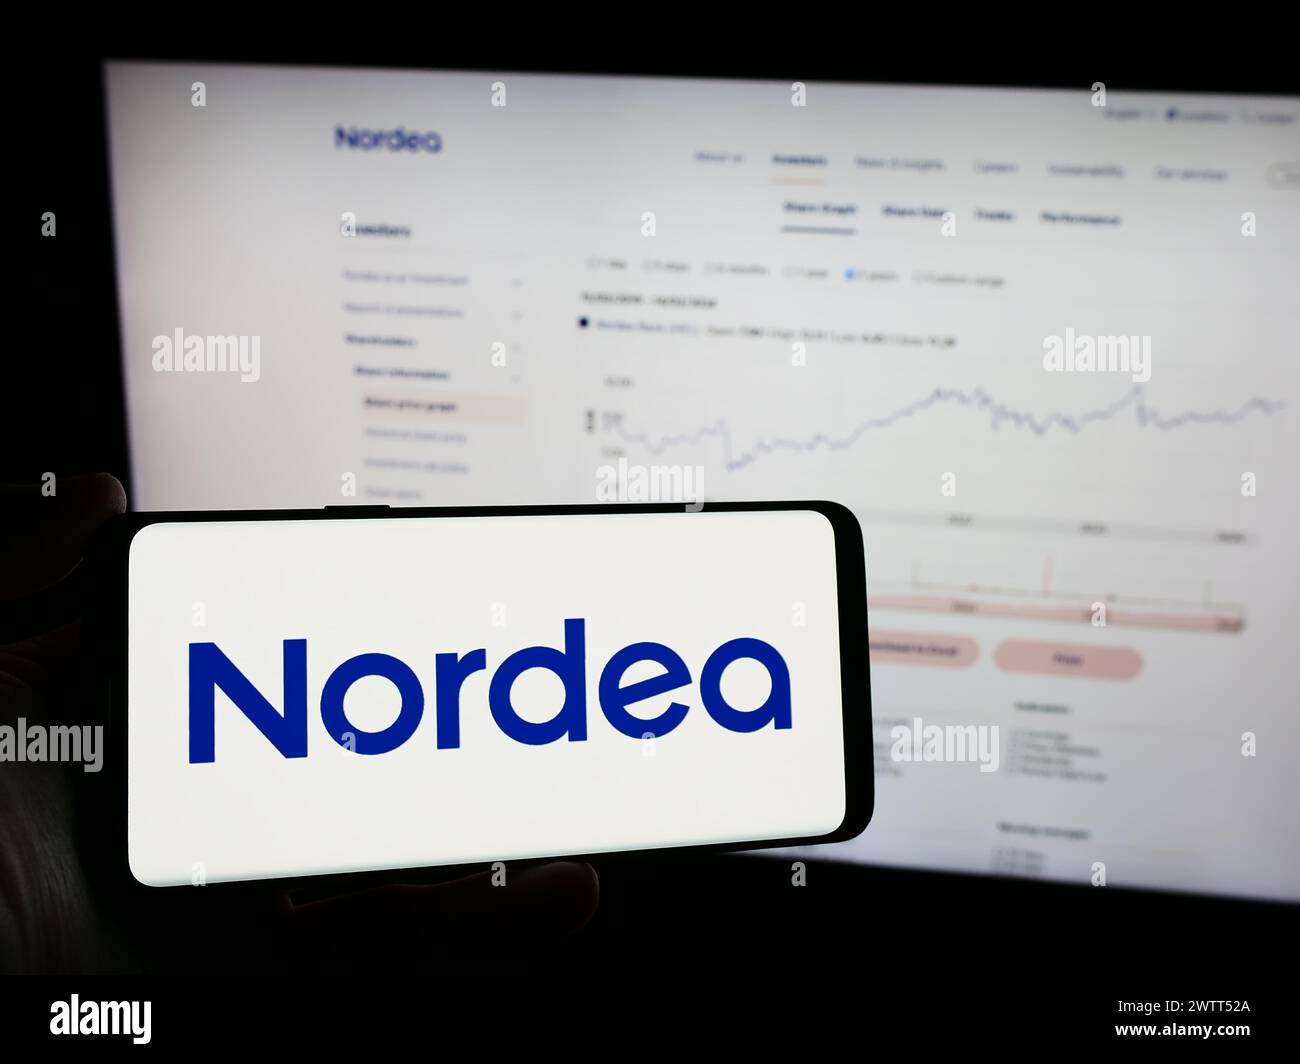 Person holding mobile phone with logo of Finnish financial services company Nordea Bank Abp in front of business web page. Focus on phone display. Stock Photo